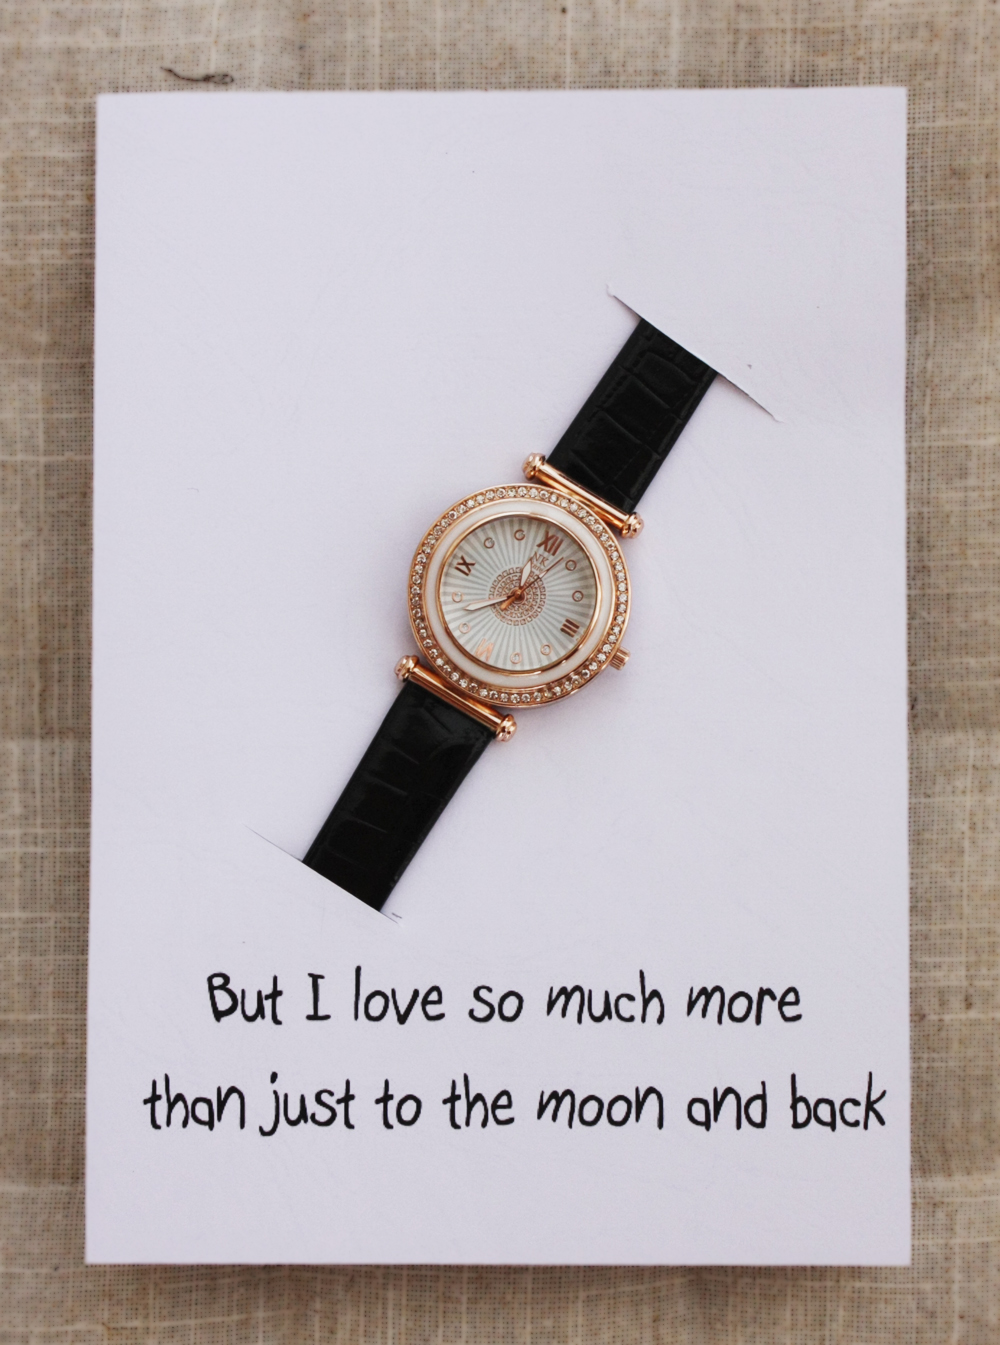 I Love You Much More Than To The Moon And Back Card Black Band Fashion Wristwatch Classy Woman Watch